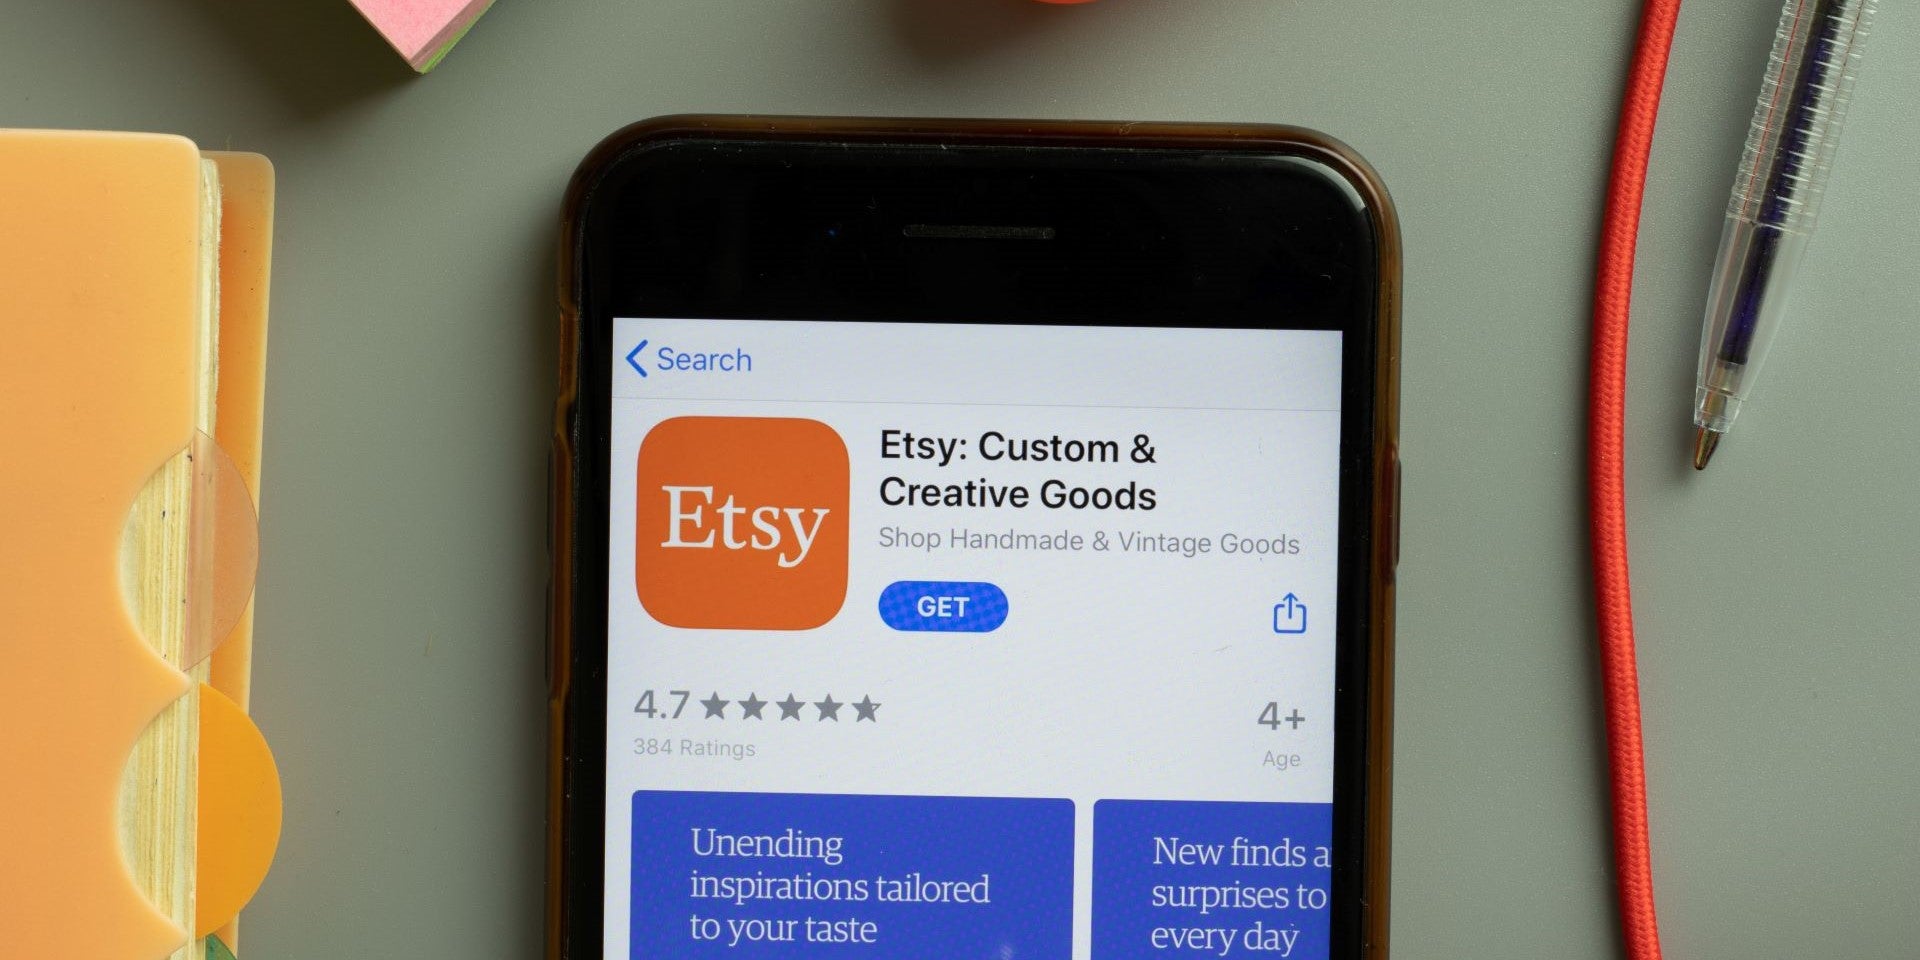 how-to-change-my-phone-number-on-etsy